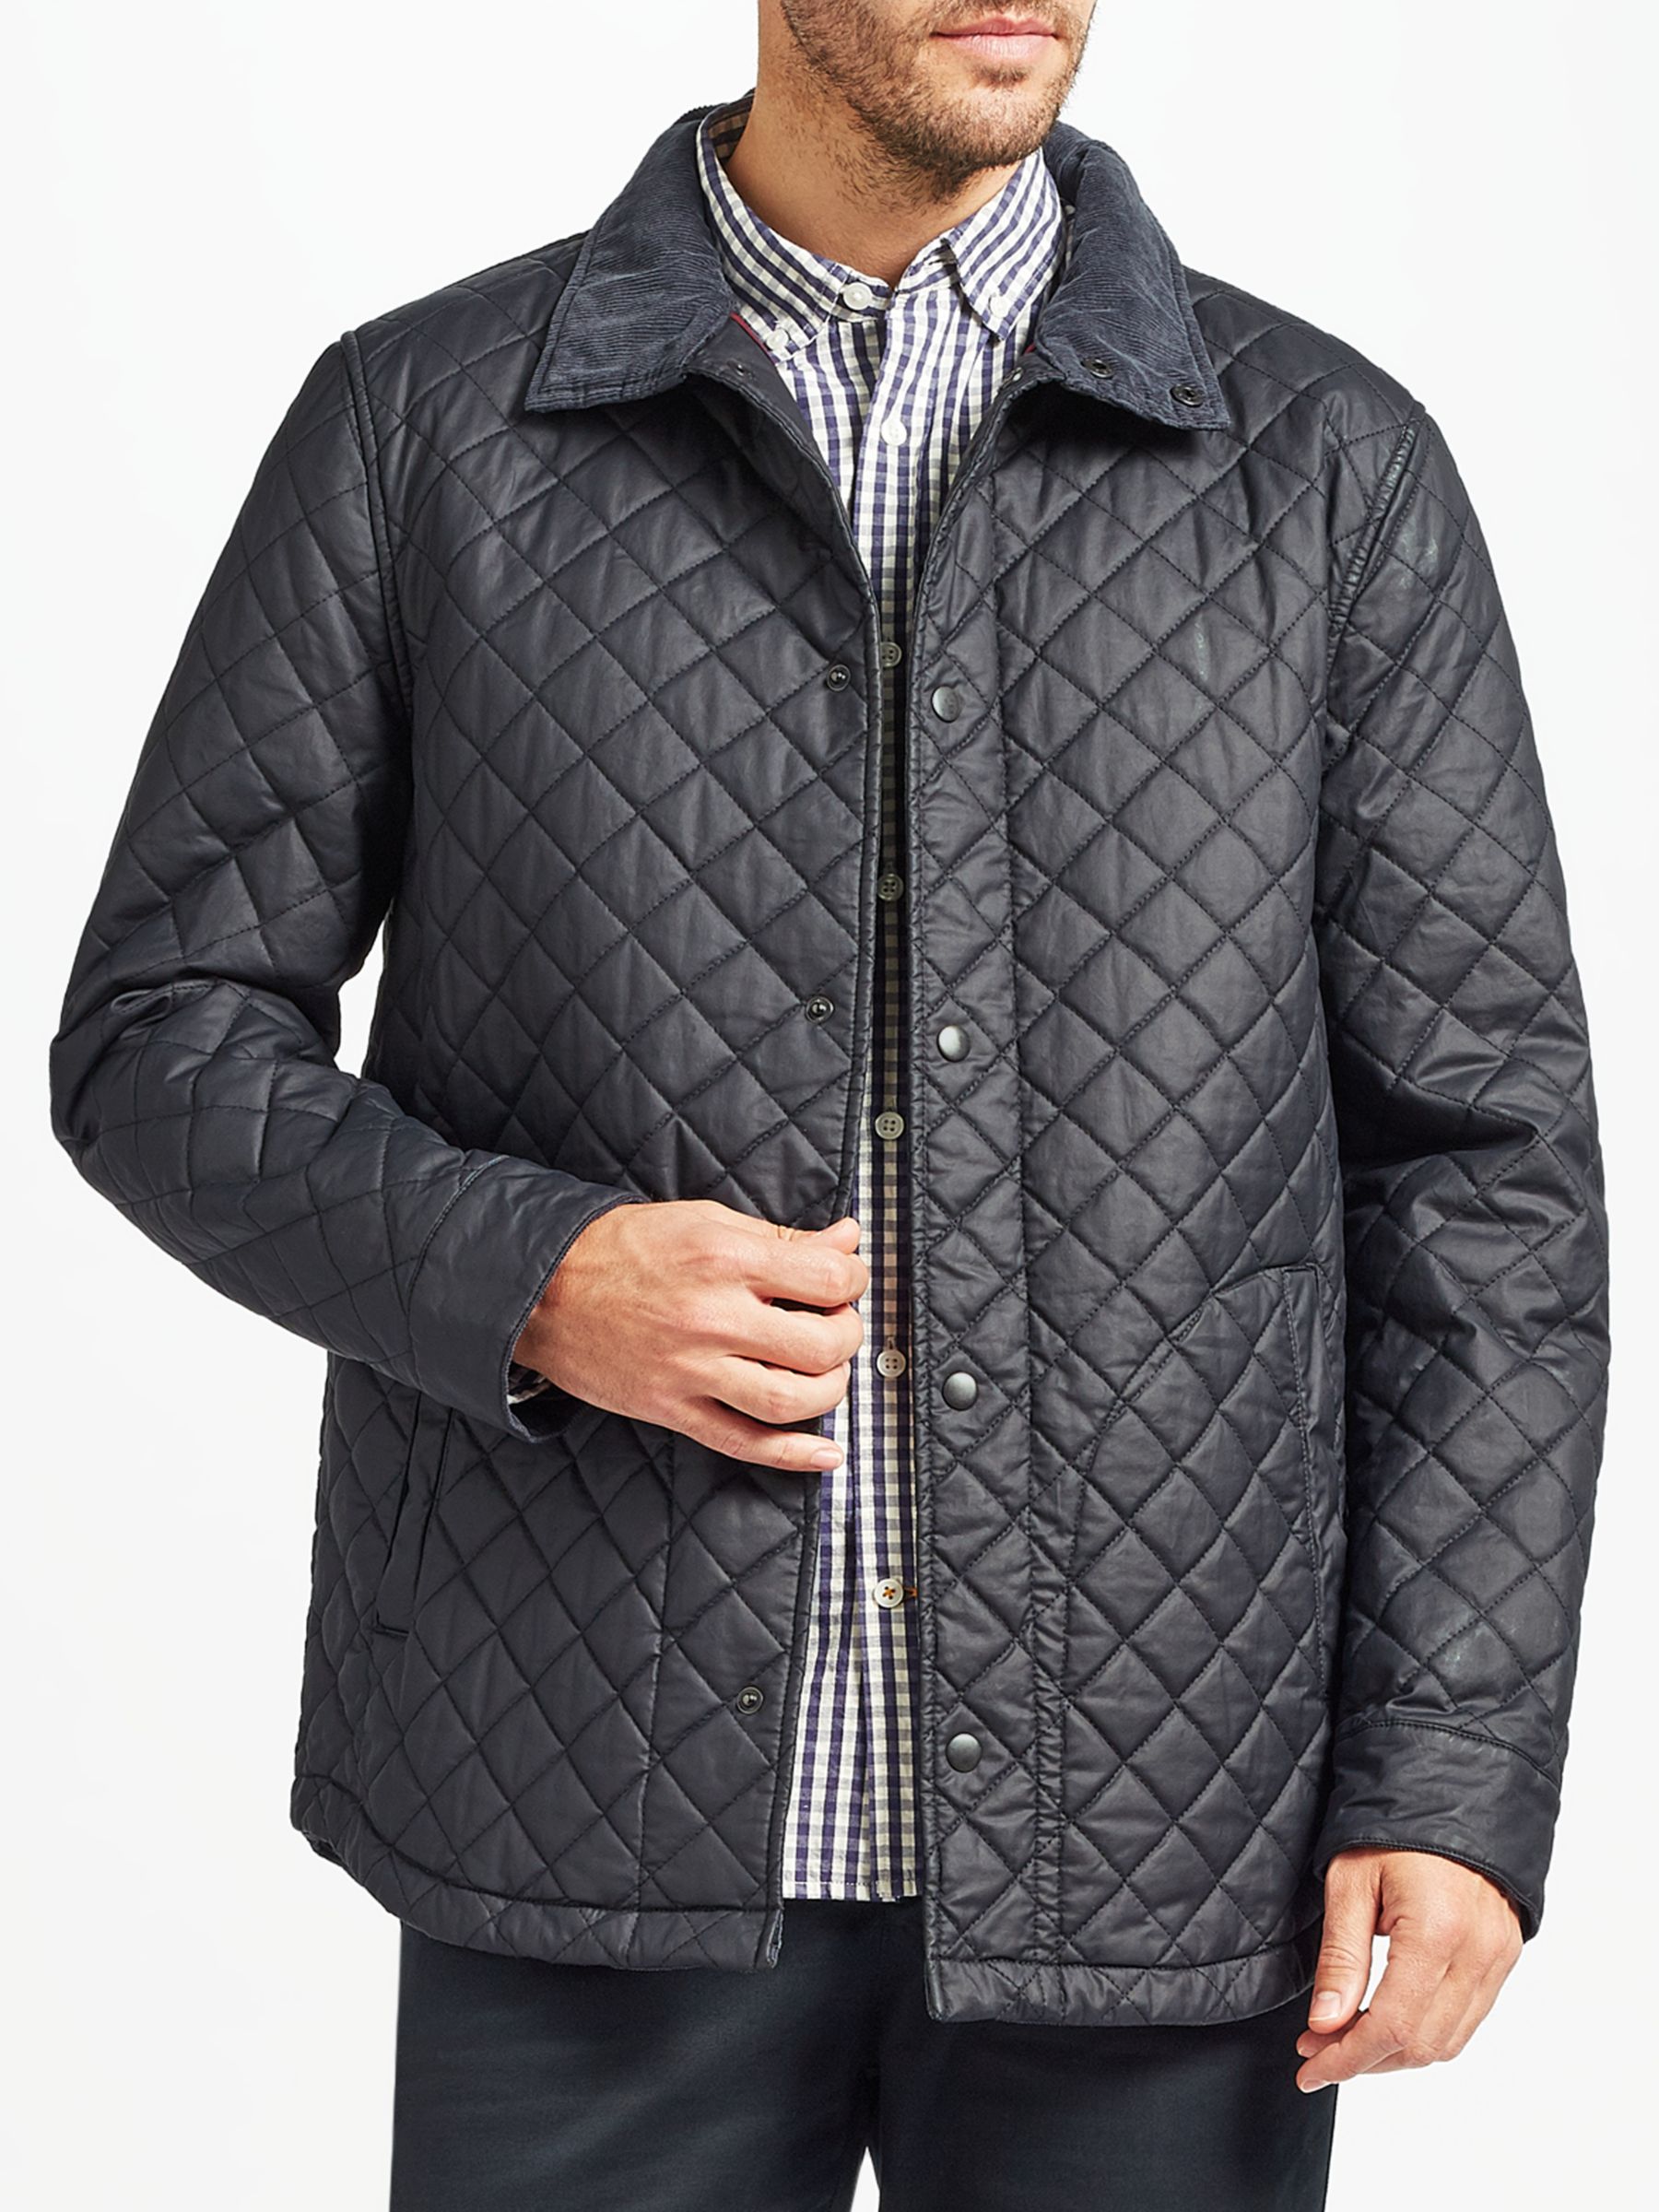 John Lewis & Partners Quilted Jacket, Navy, XXL